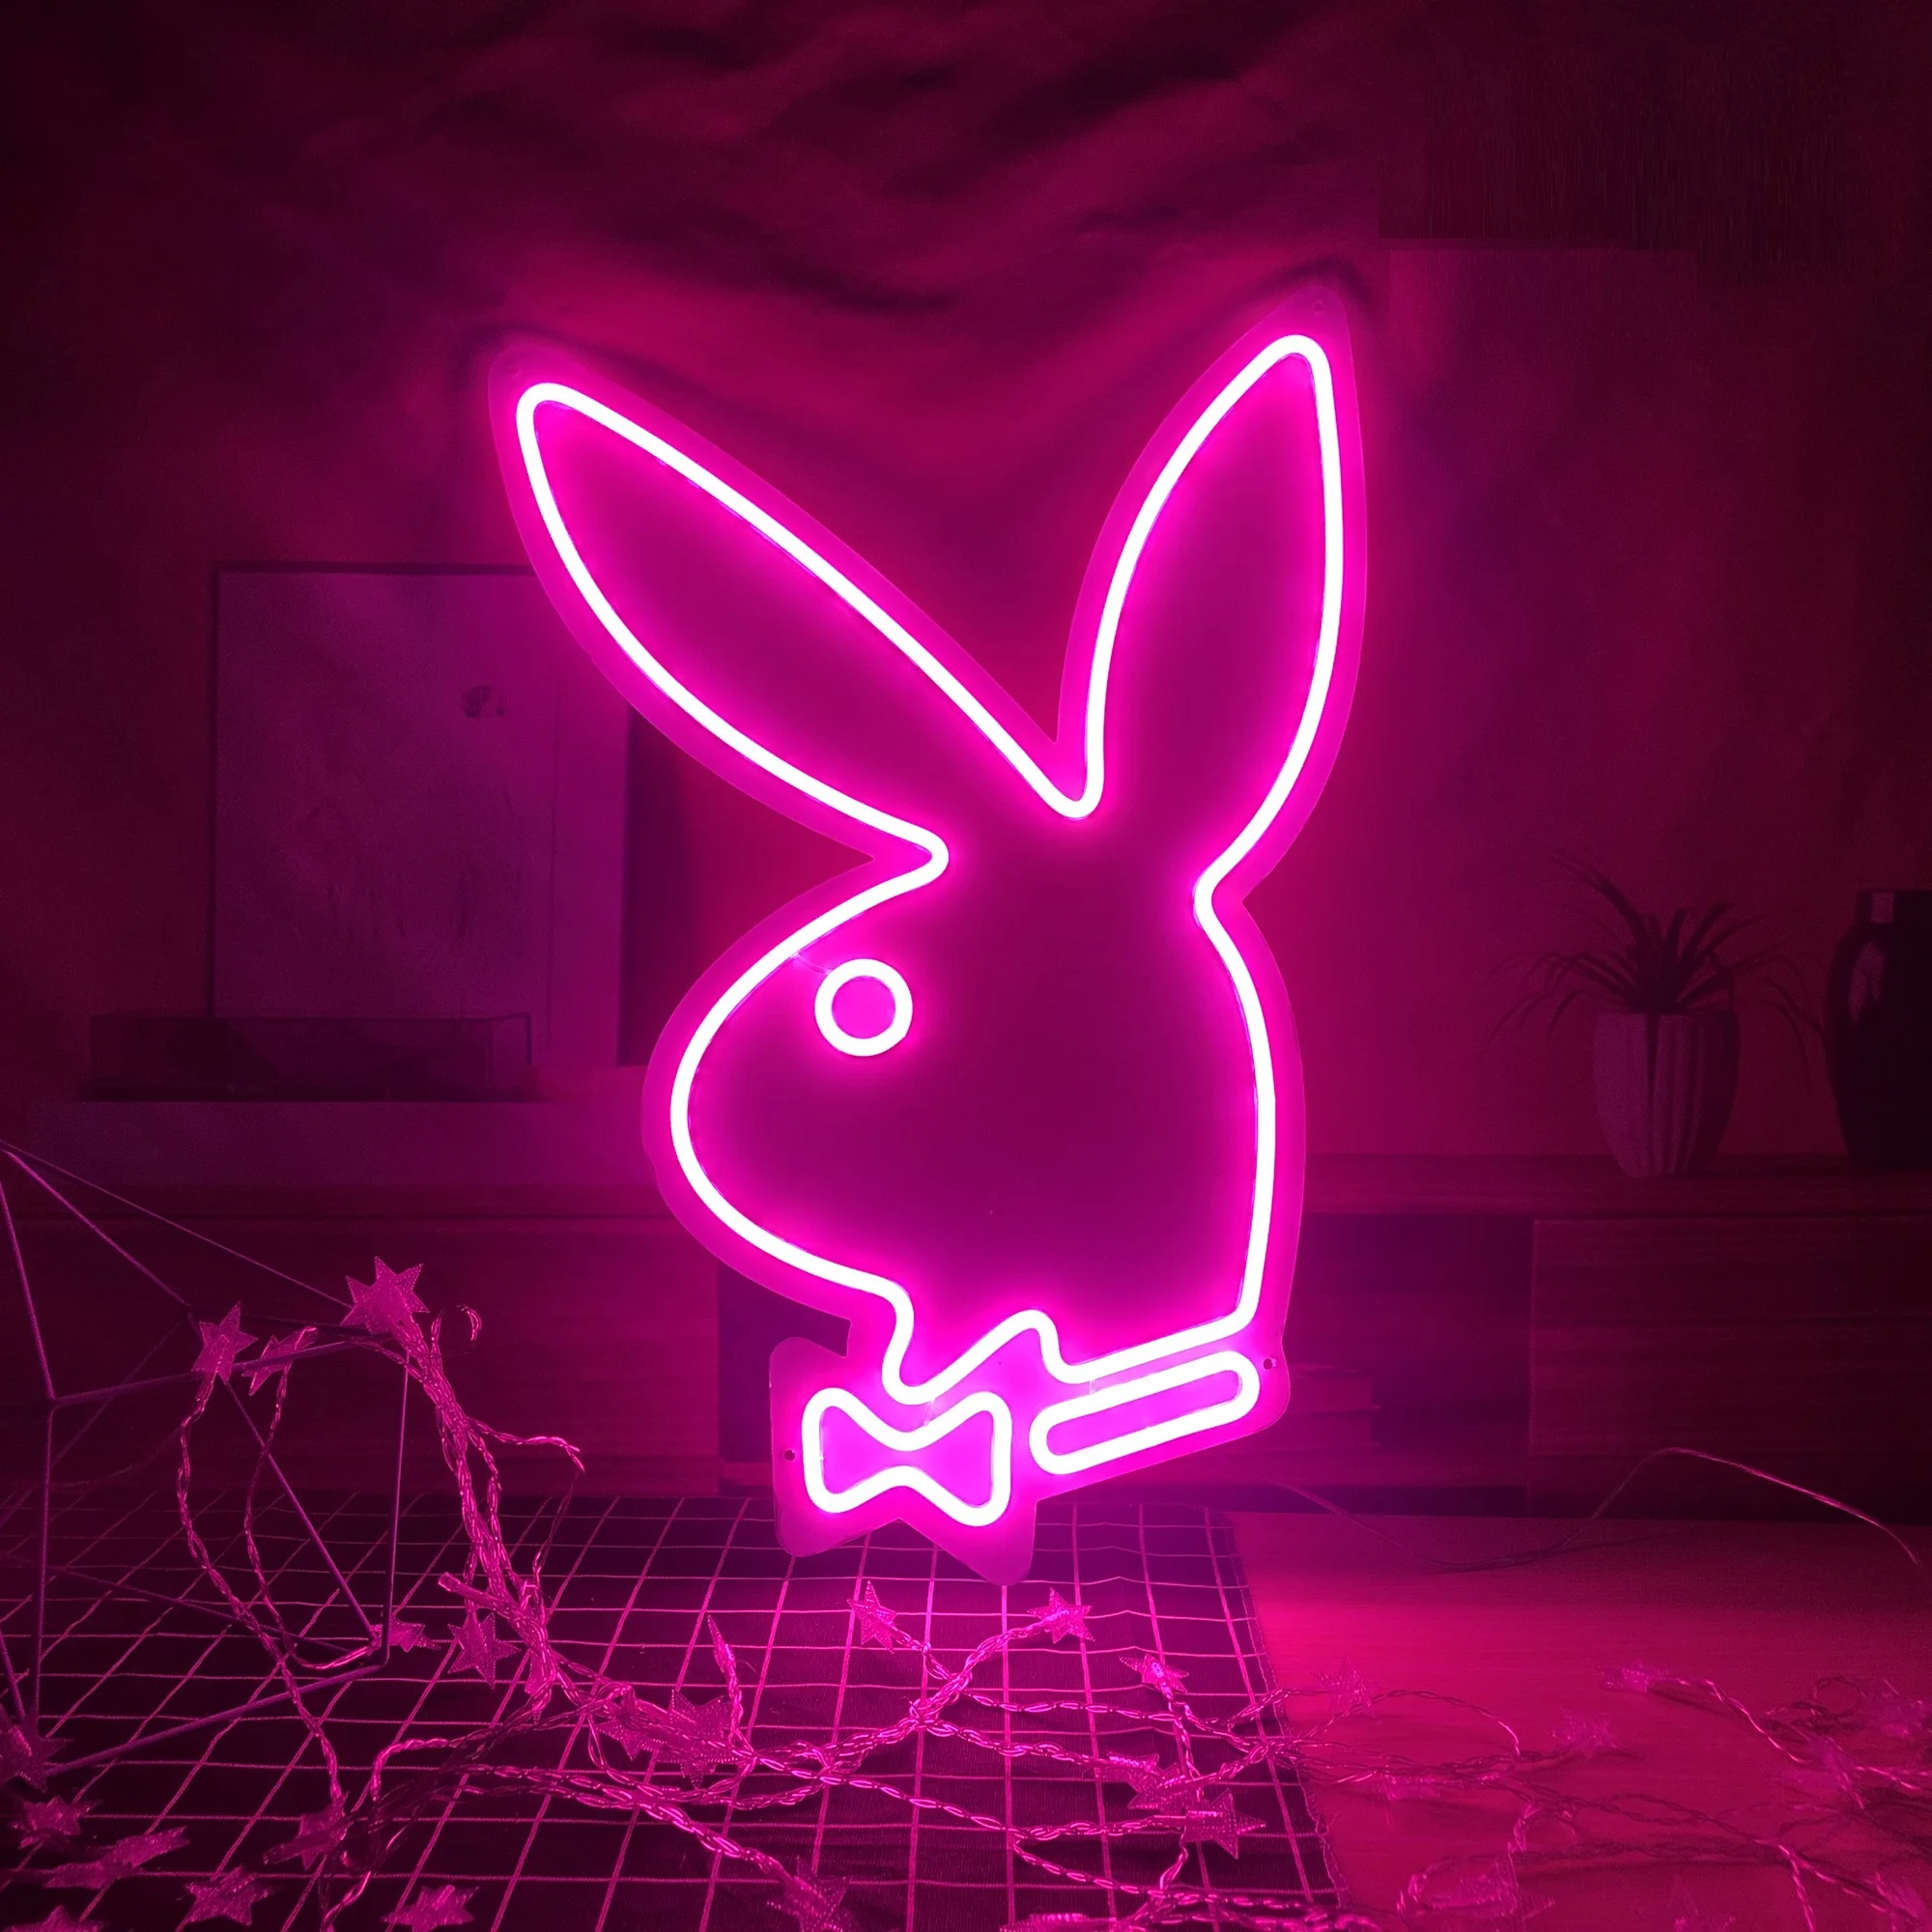 Playboy Rabbit Bunny Custom LED Neon Signs Wall Art Decor For Bar Store Apartment Home Party Room Decoartion Light Creative Gift